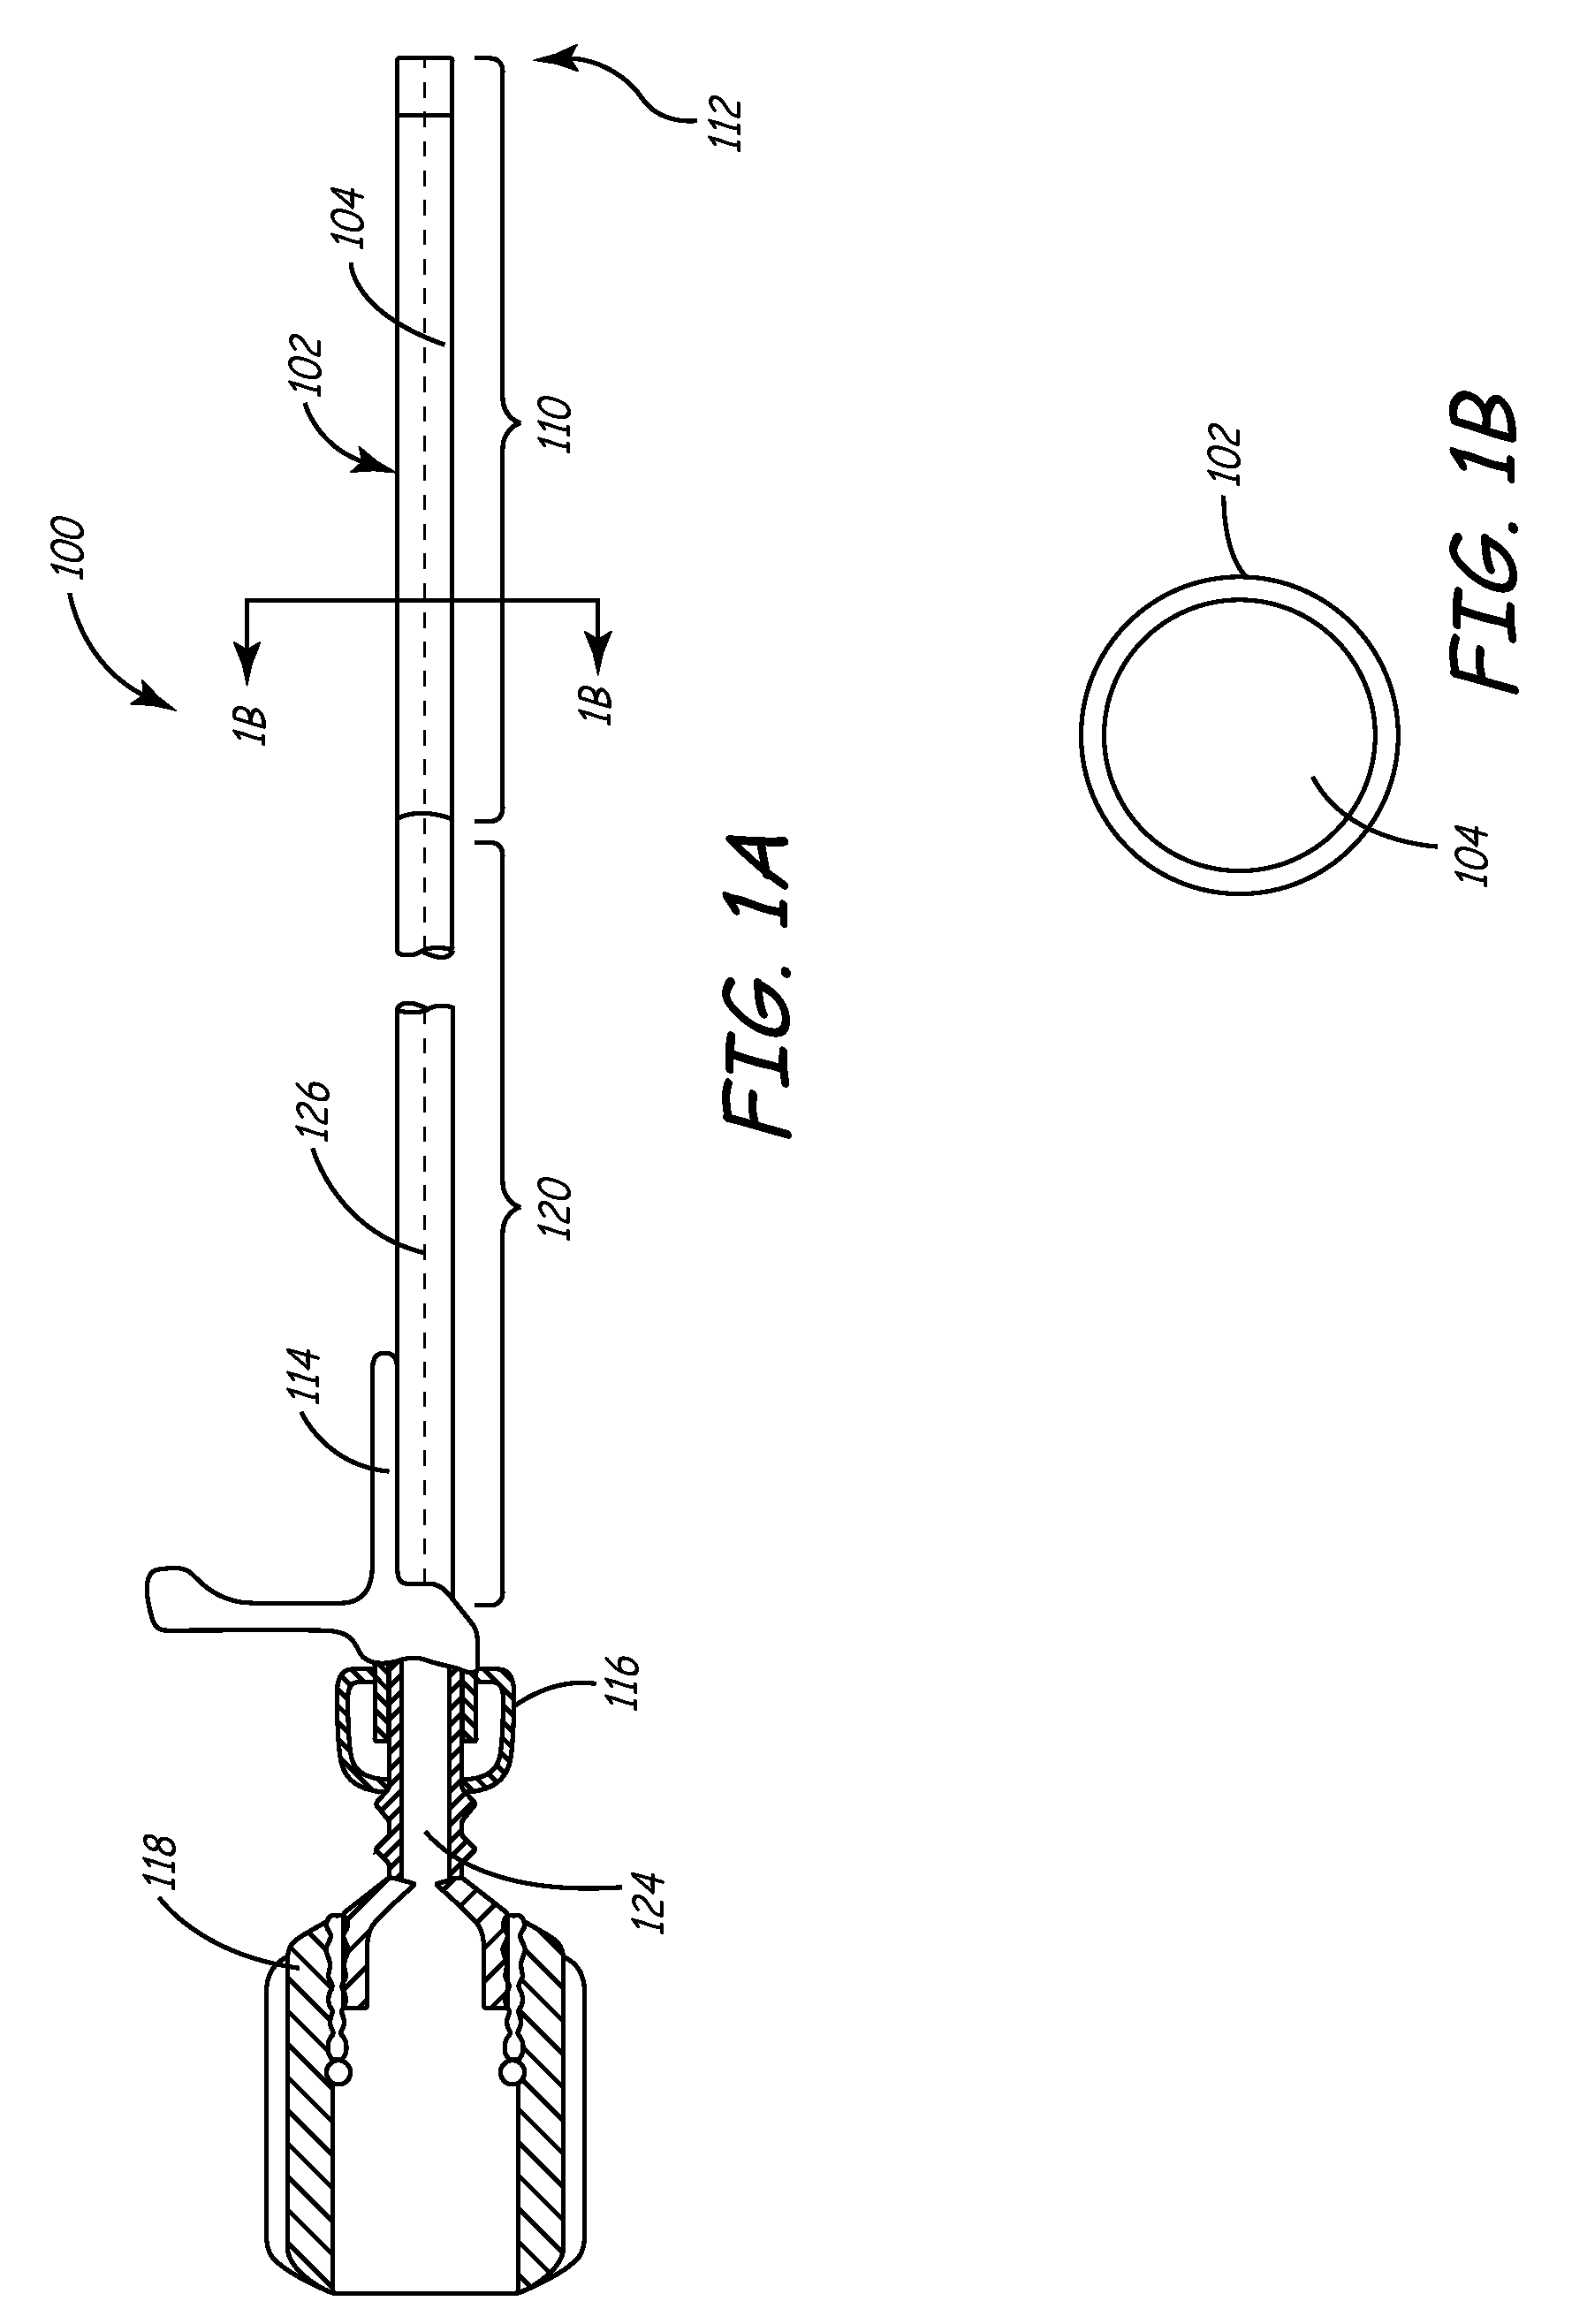 System and method for positioning implantable medical devices within coronary veins